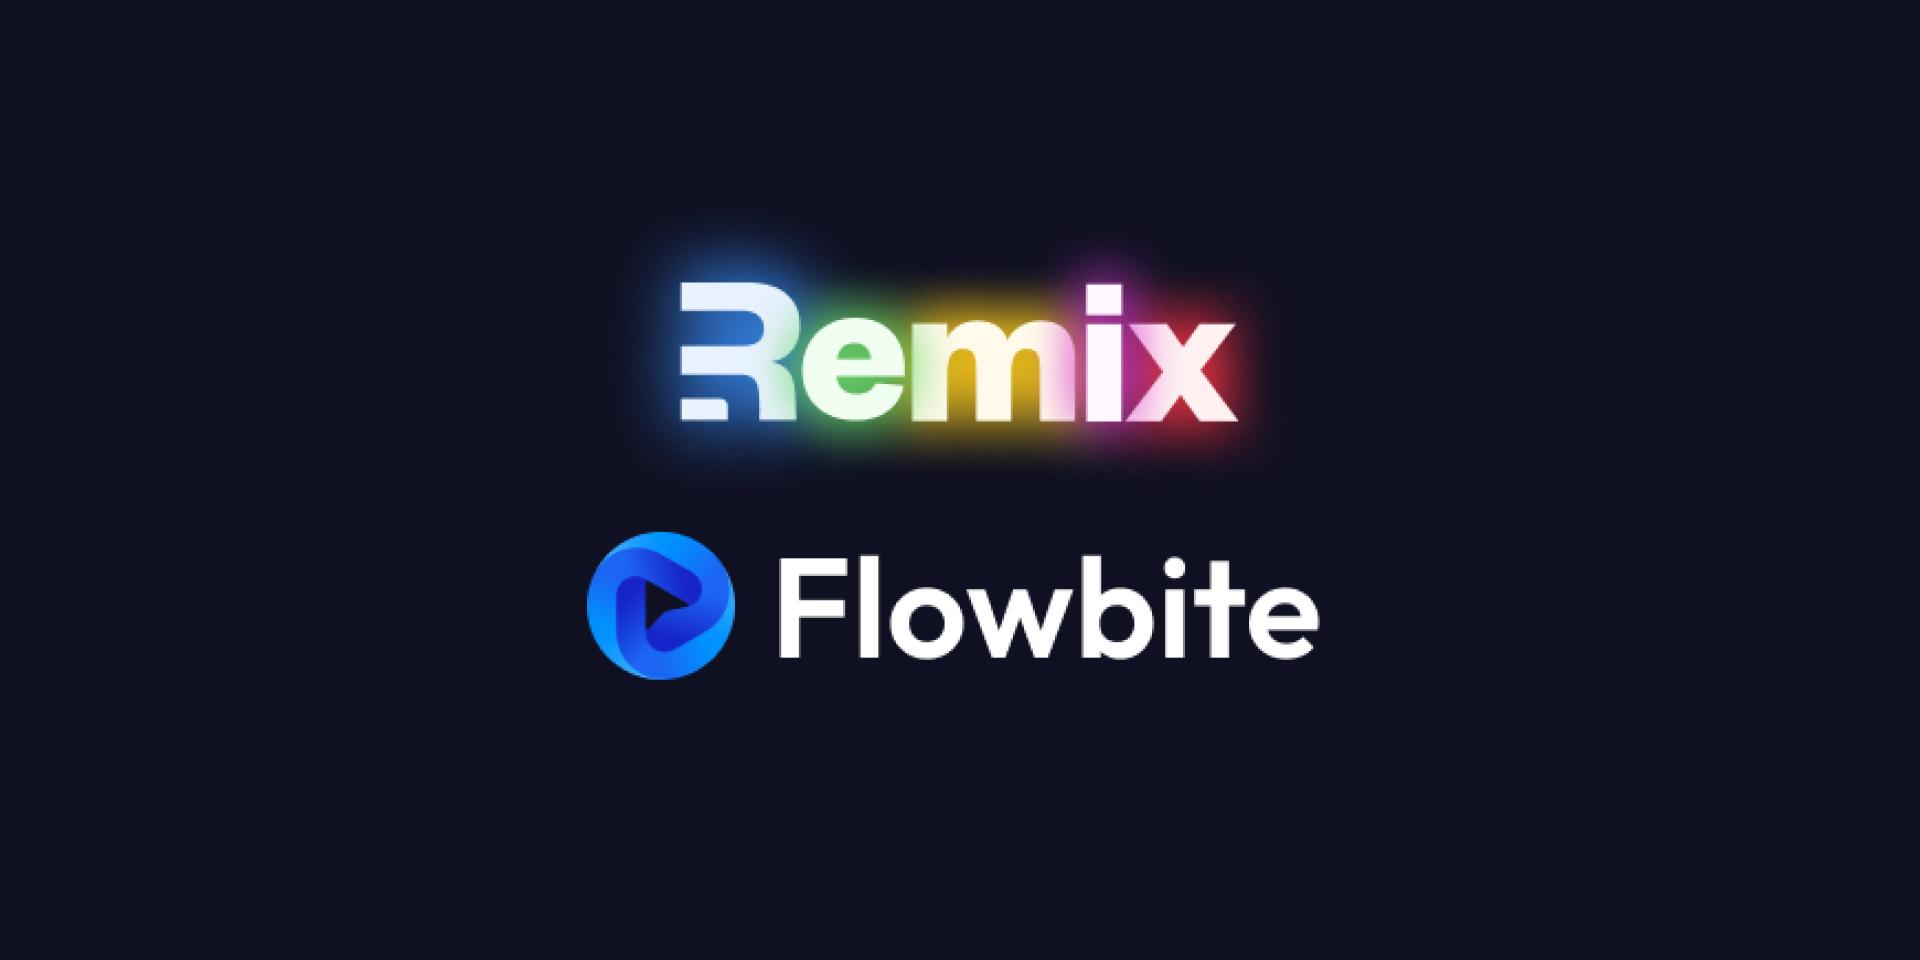 How to install Remix with Flowbite and Tailwind CSS